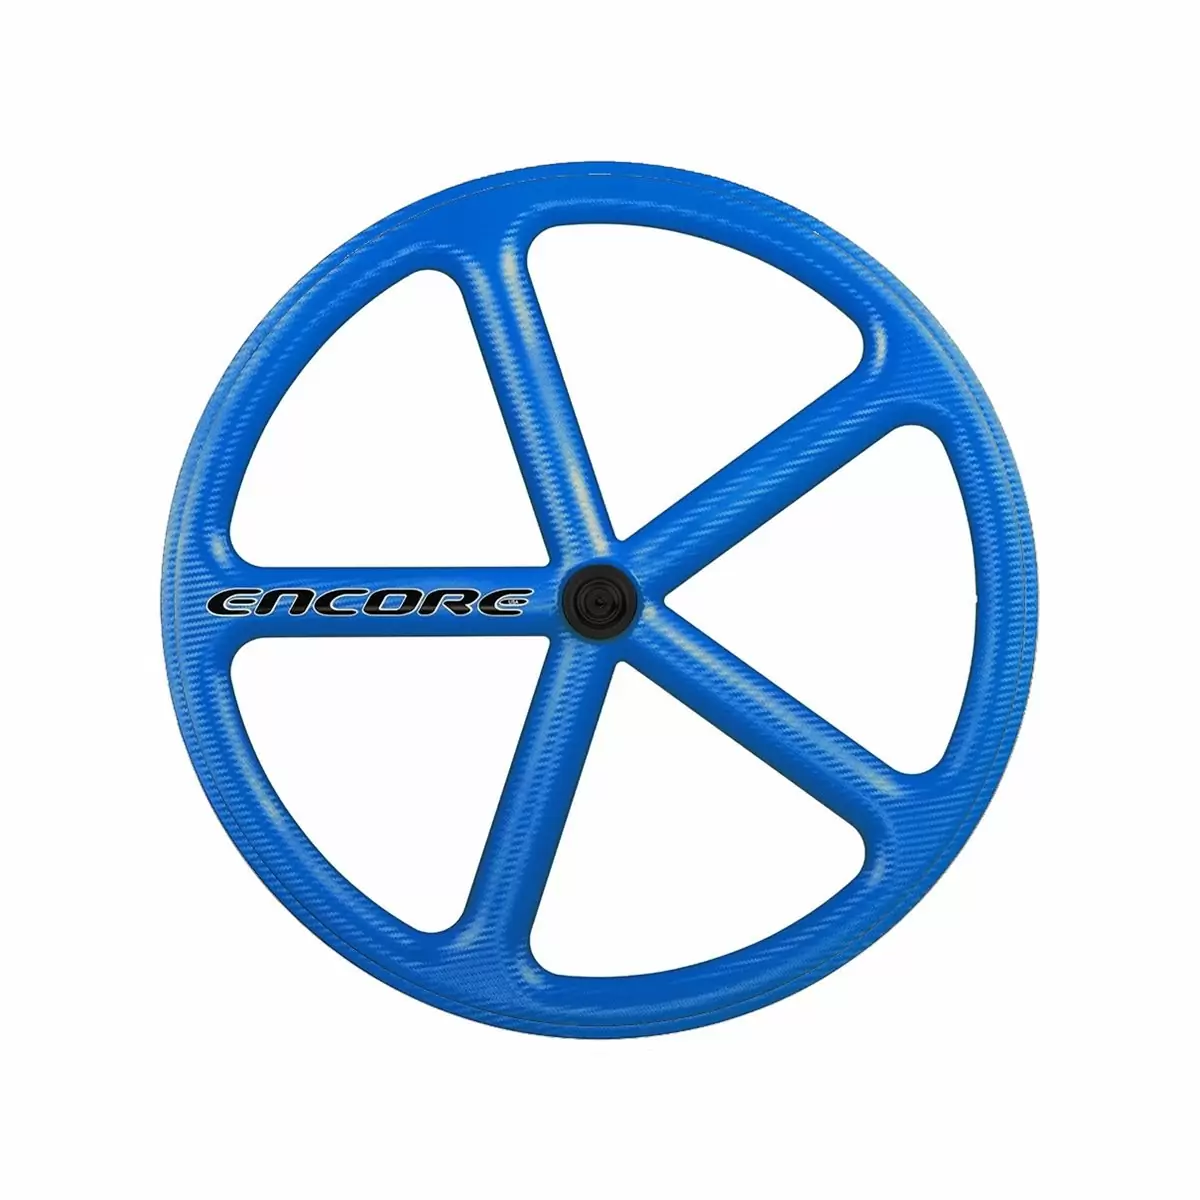 rear wheel 700c track 5 spokes carbon weave blue nmsw - image